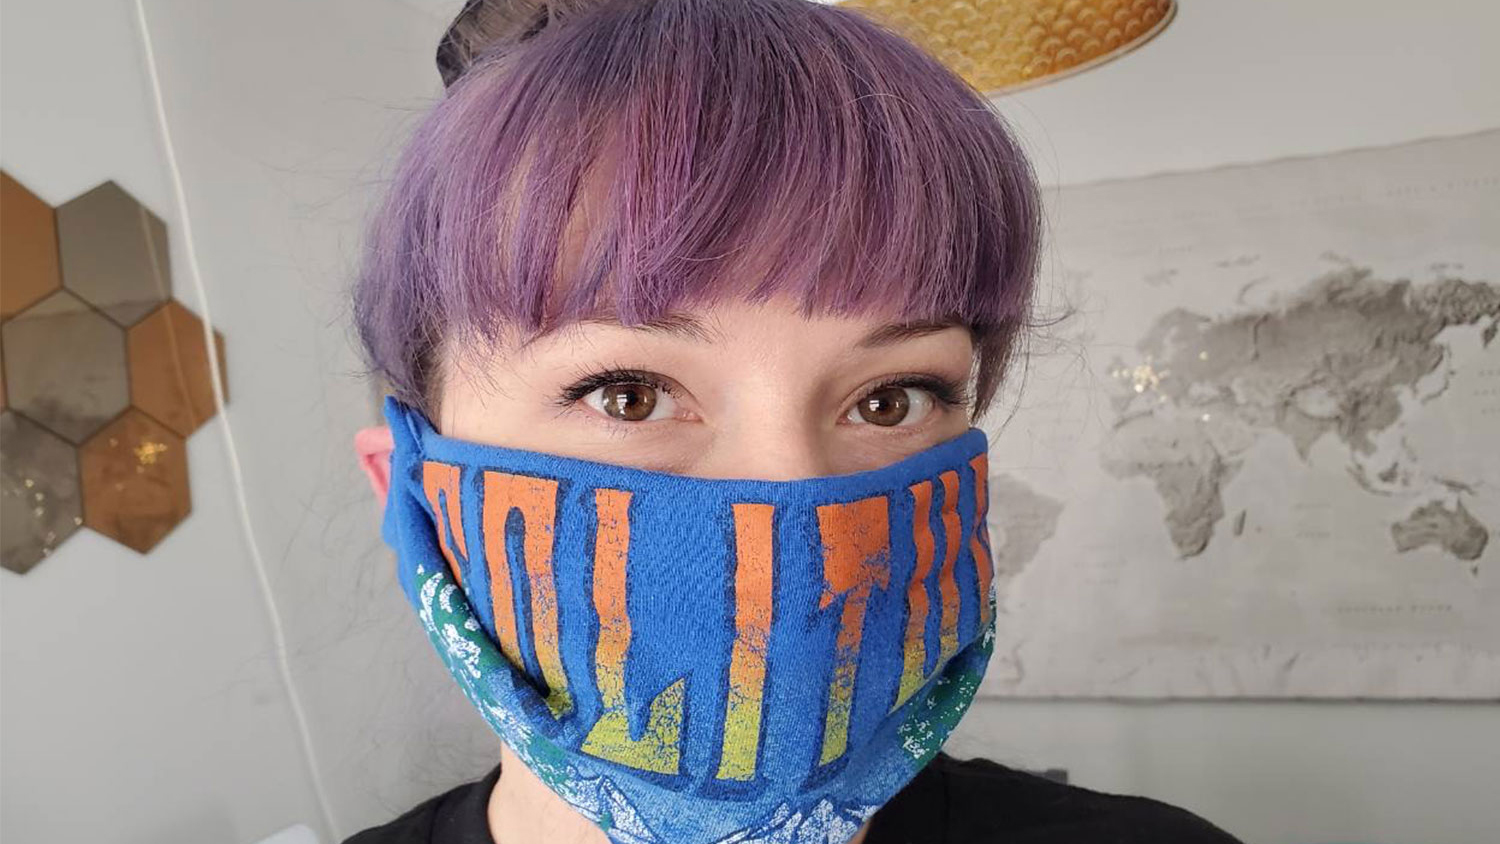 How to make a no-sew face mask